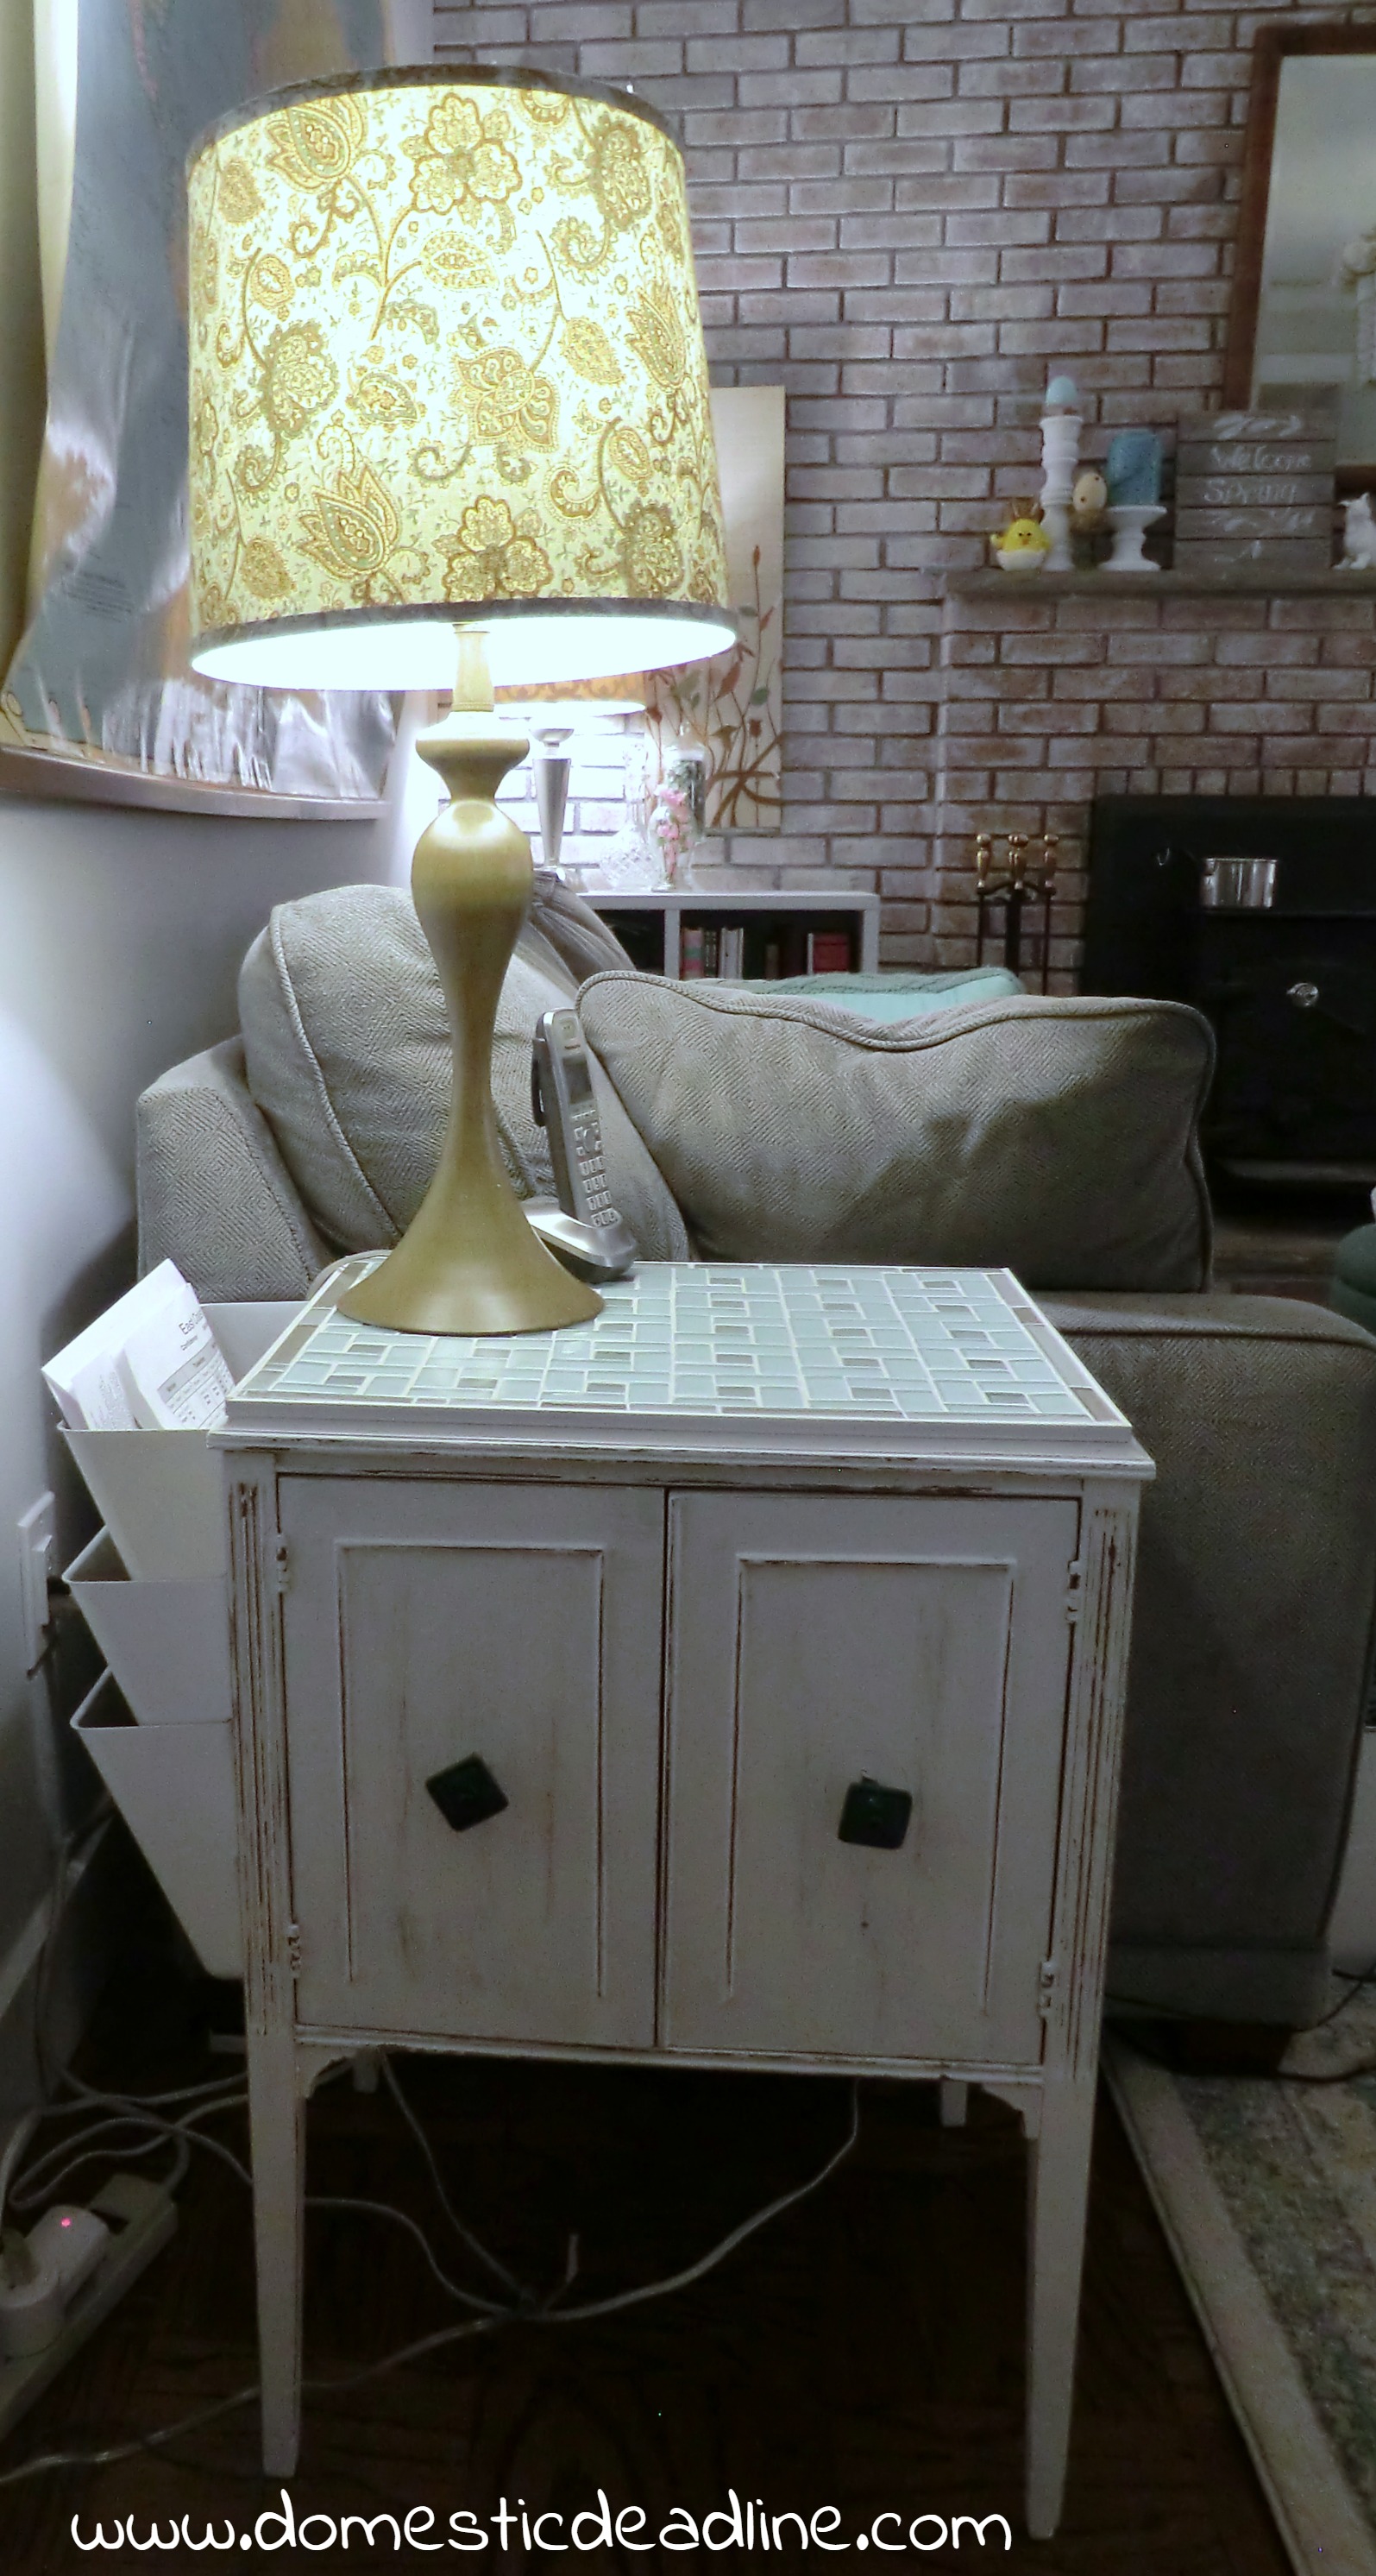 How to Turn an End Table into a Mini Office with Tile Top